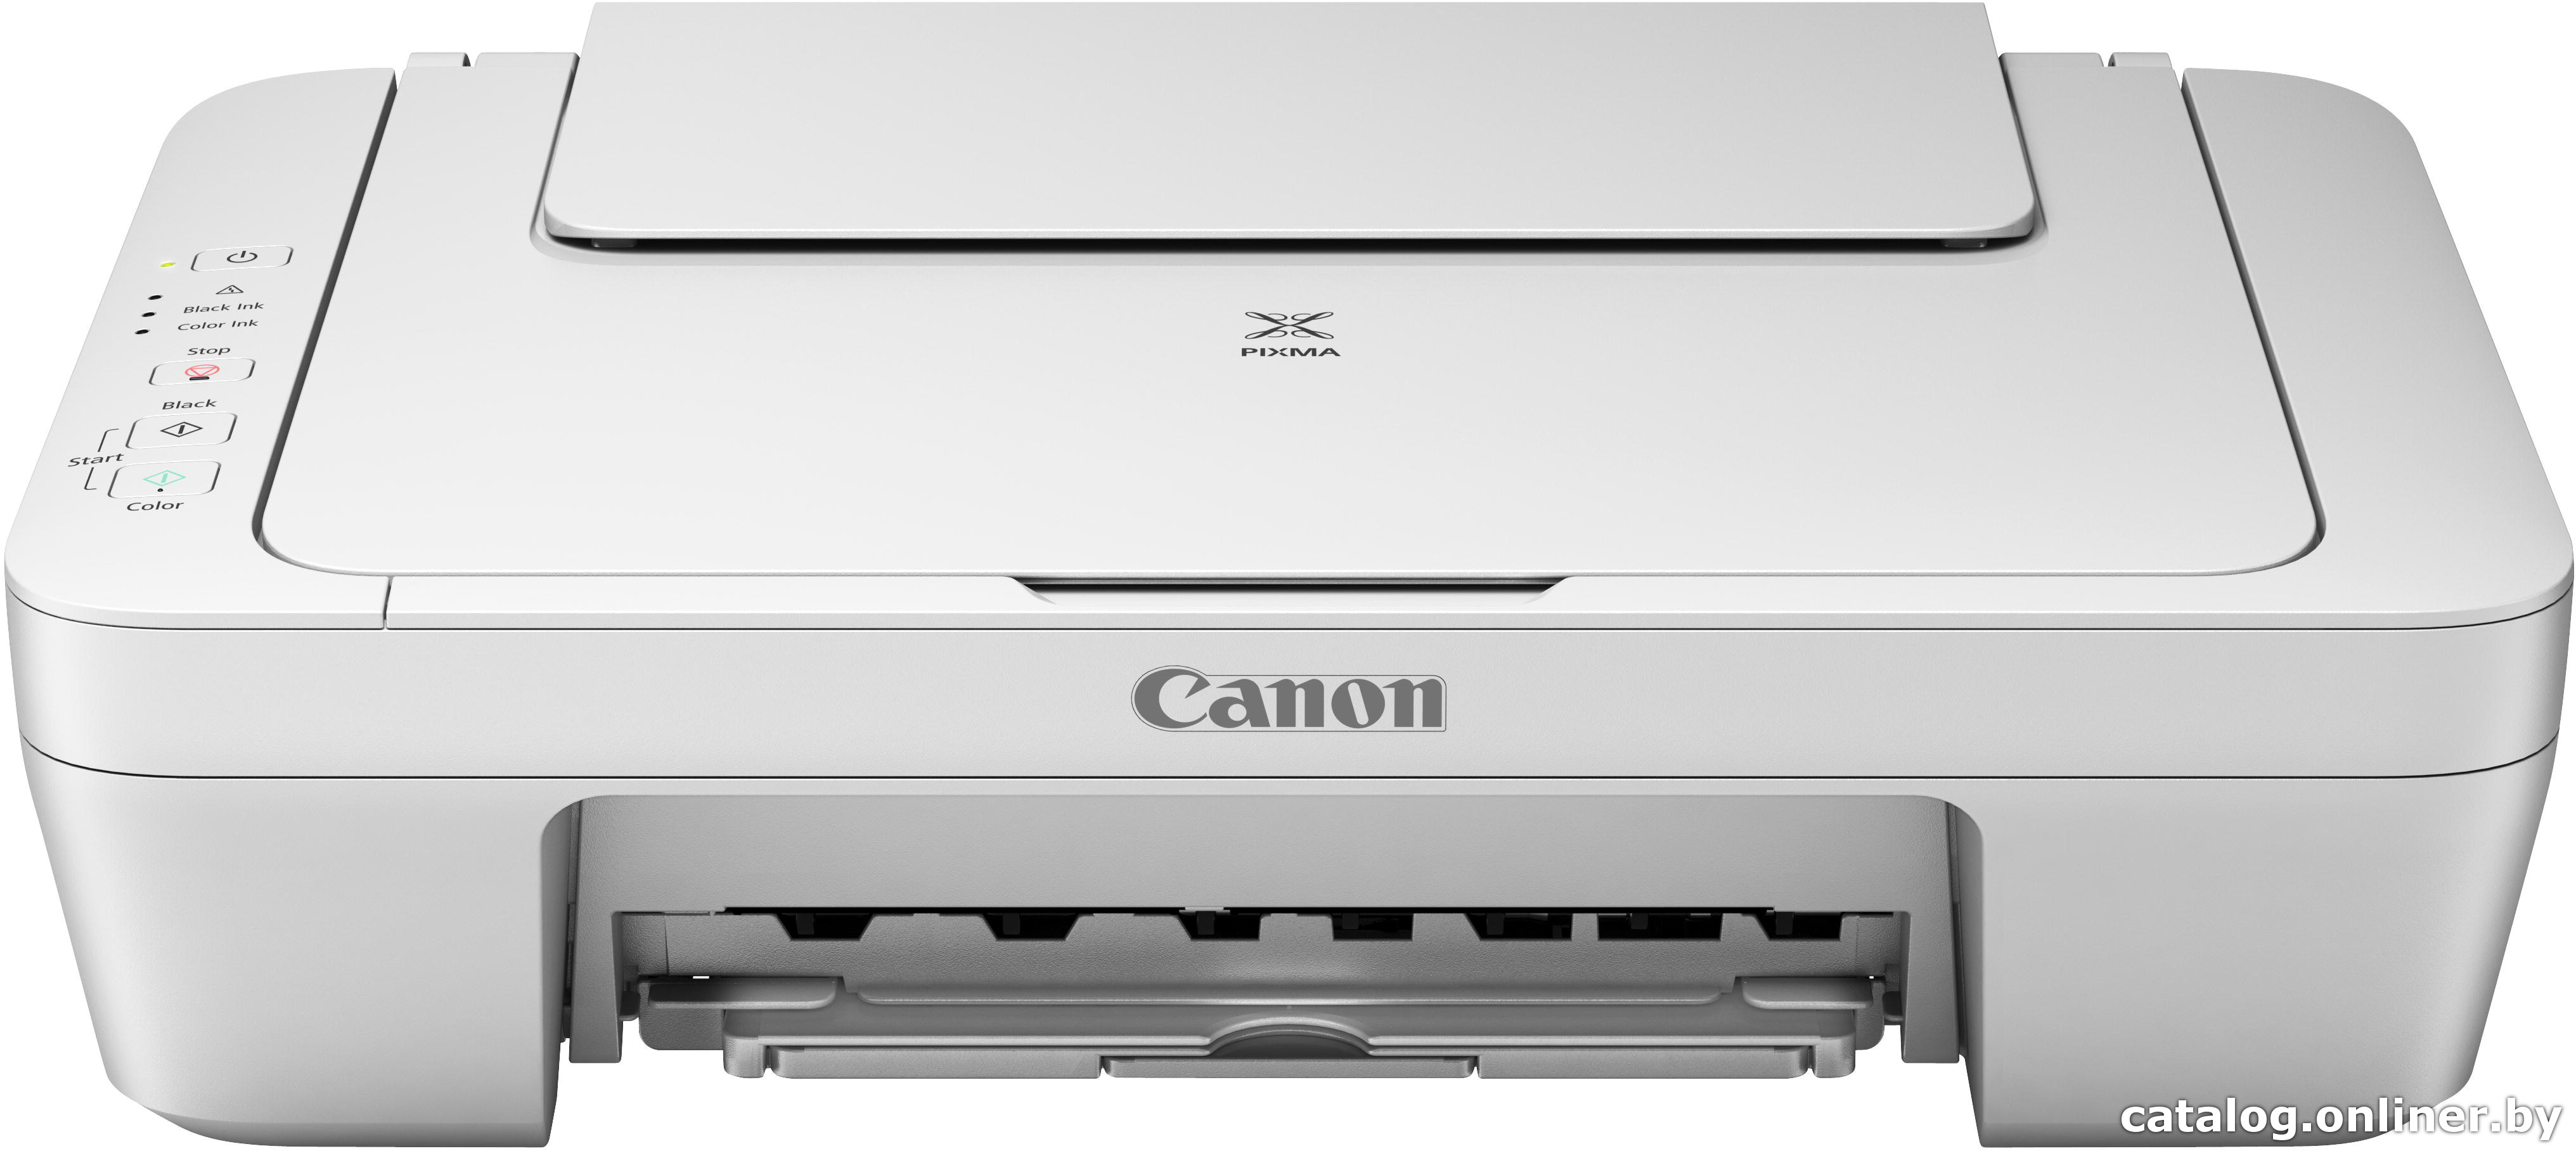 Canon MG2540S Driver Mac High Sierra How-to Download and Install - Featured